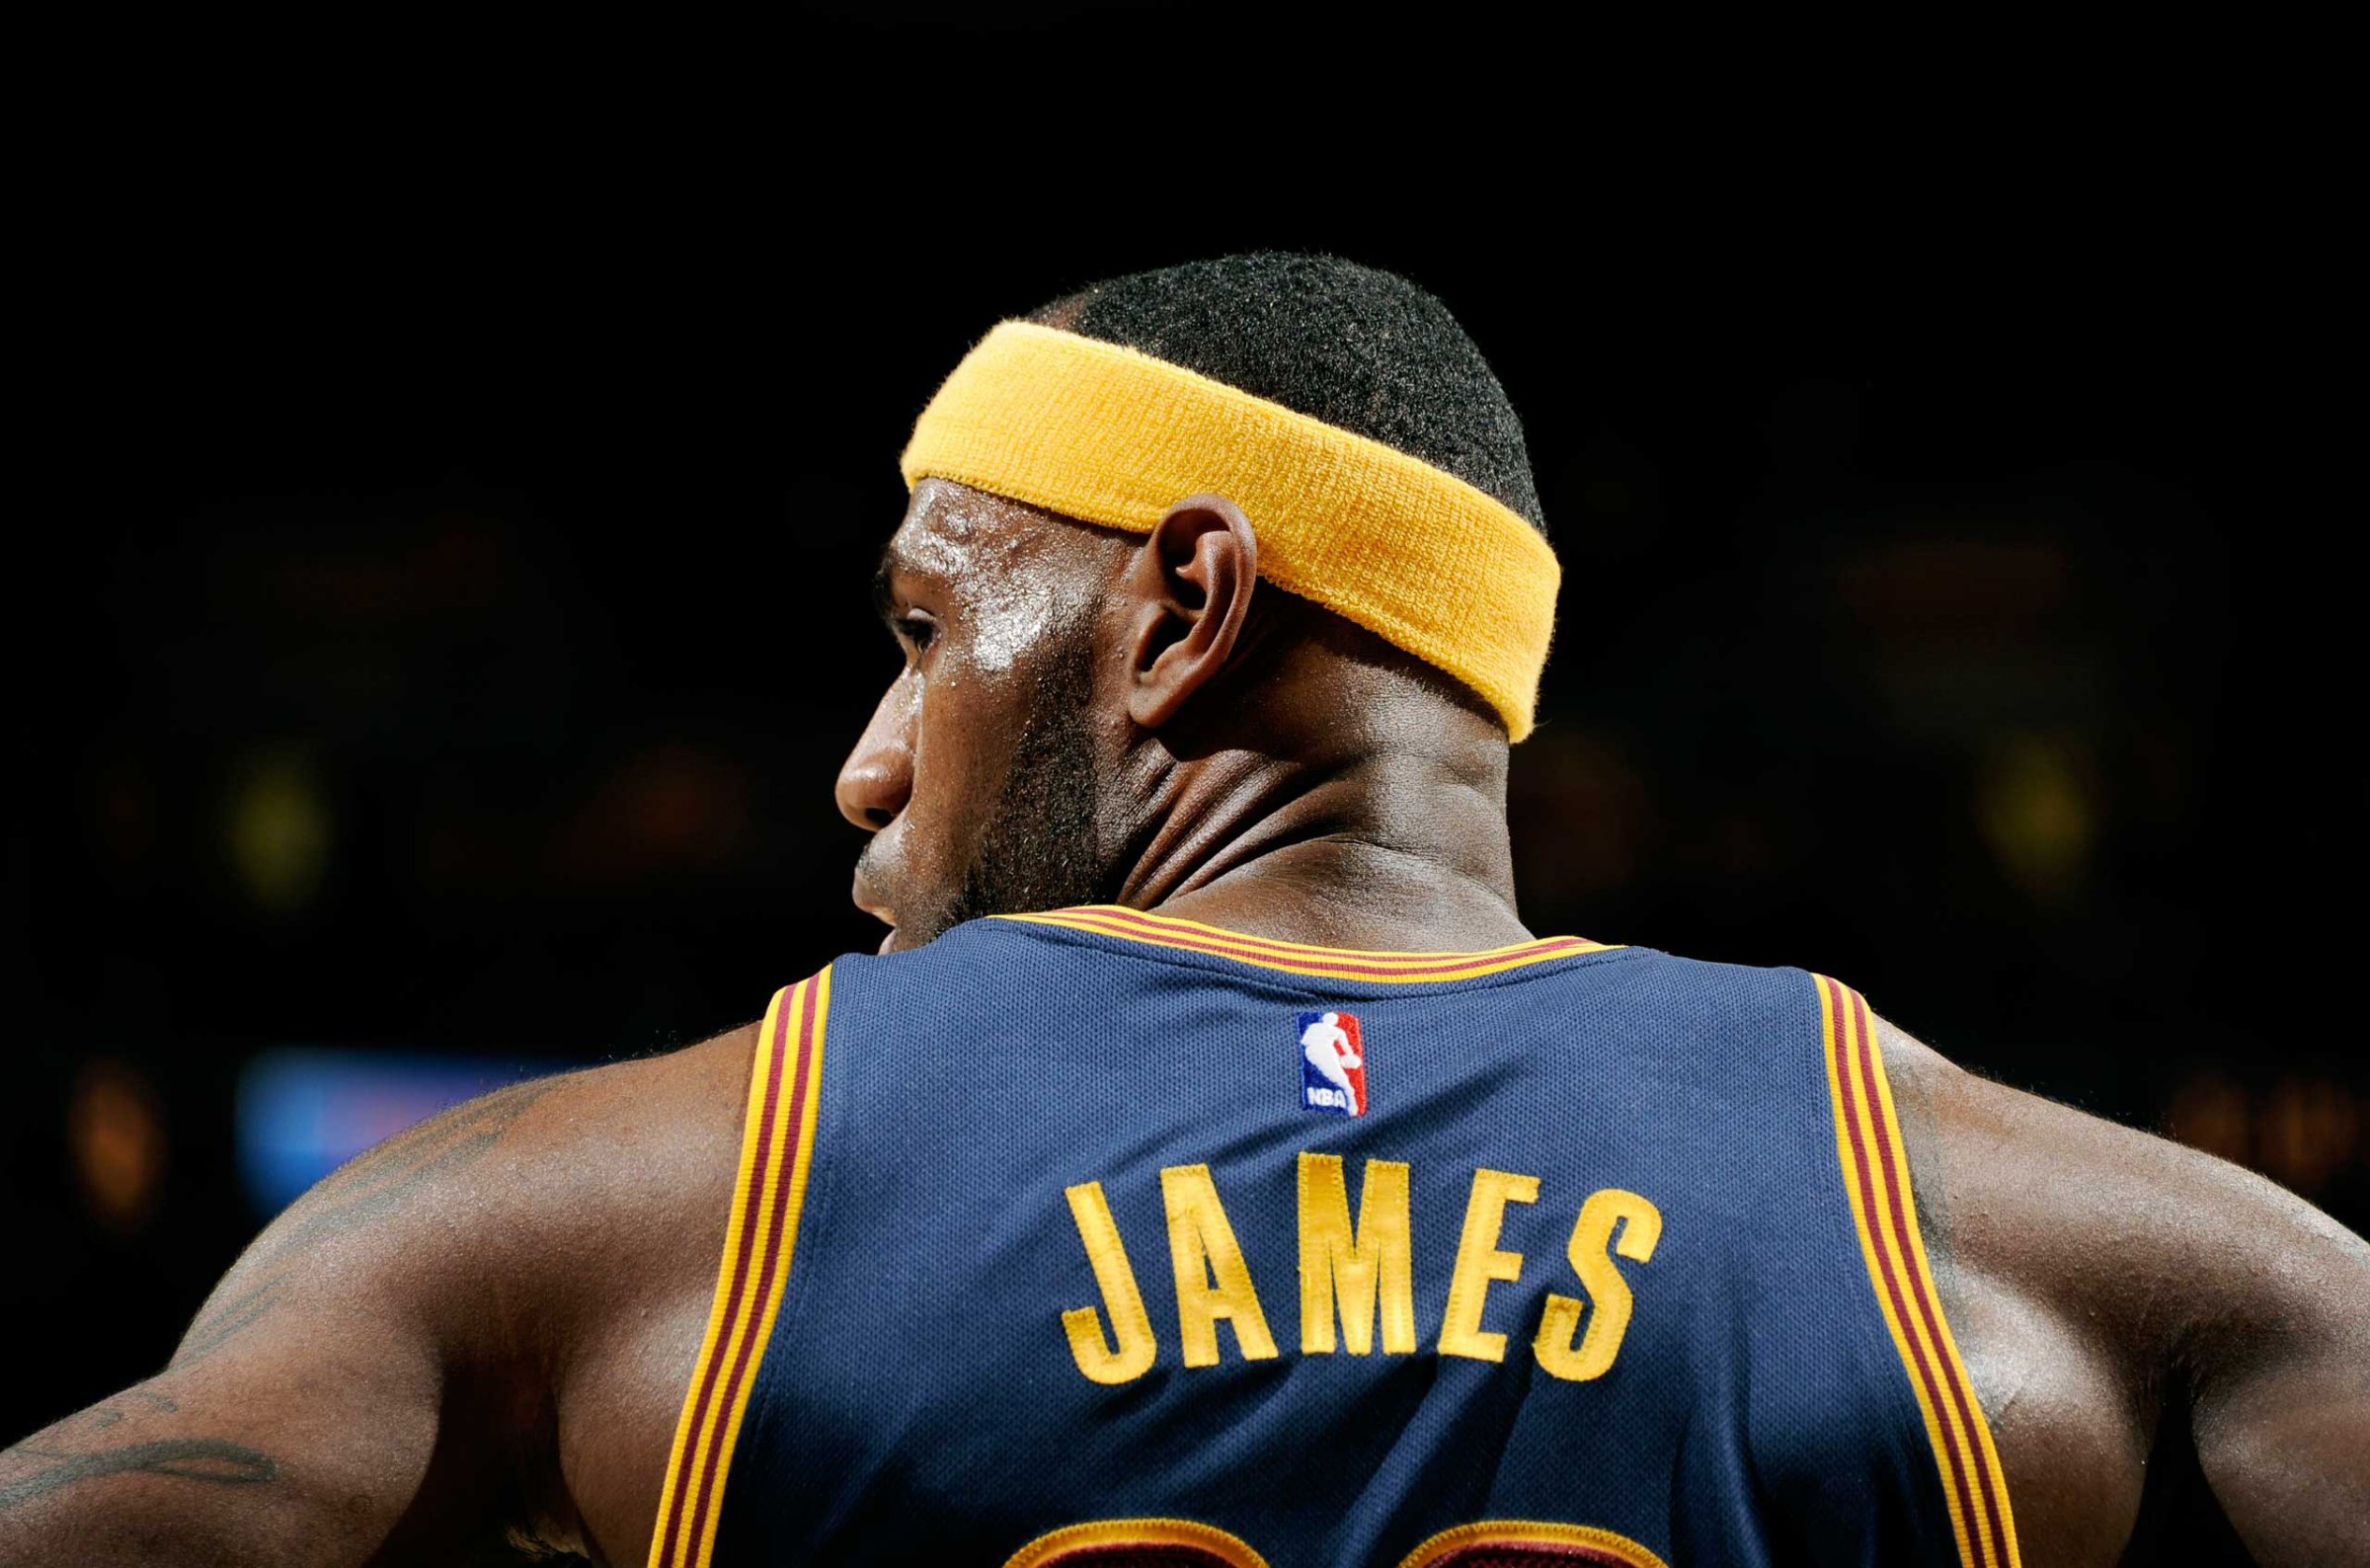 LeBron James #23 of the Cleveland Cavaliers stands on the court during a game against the New York Knicks on Oct. 30, 2014 in Cleveland, Ohio.